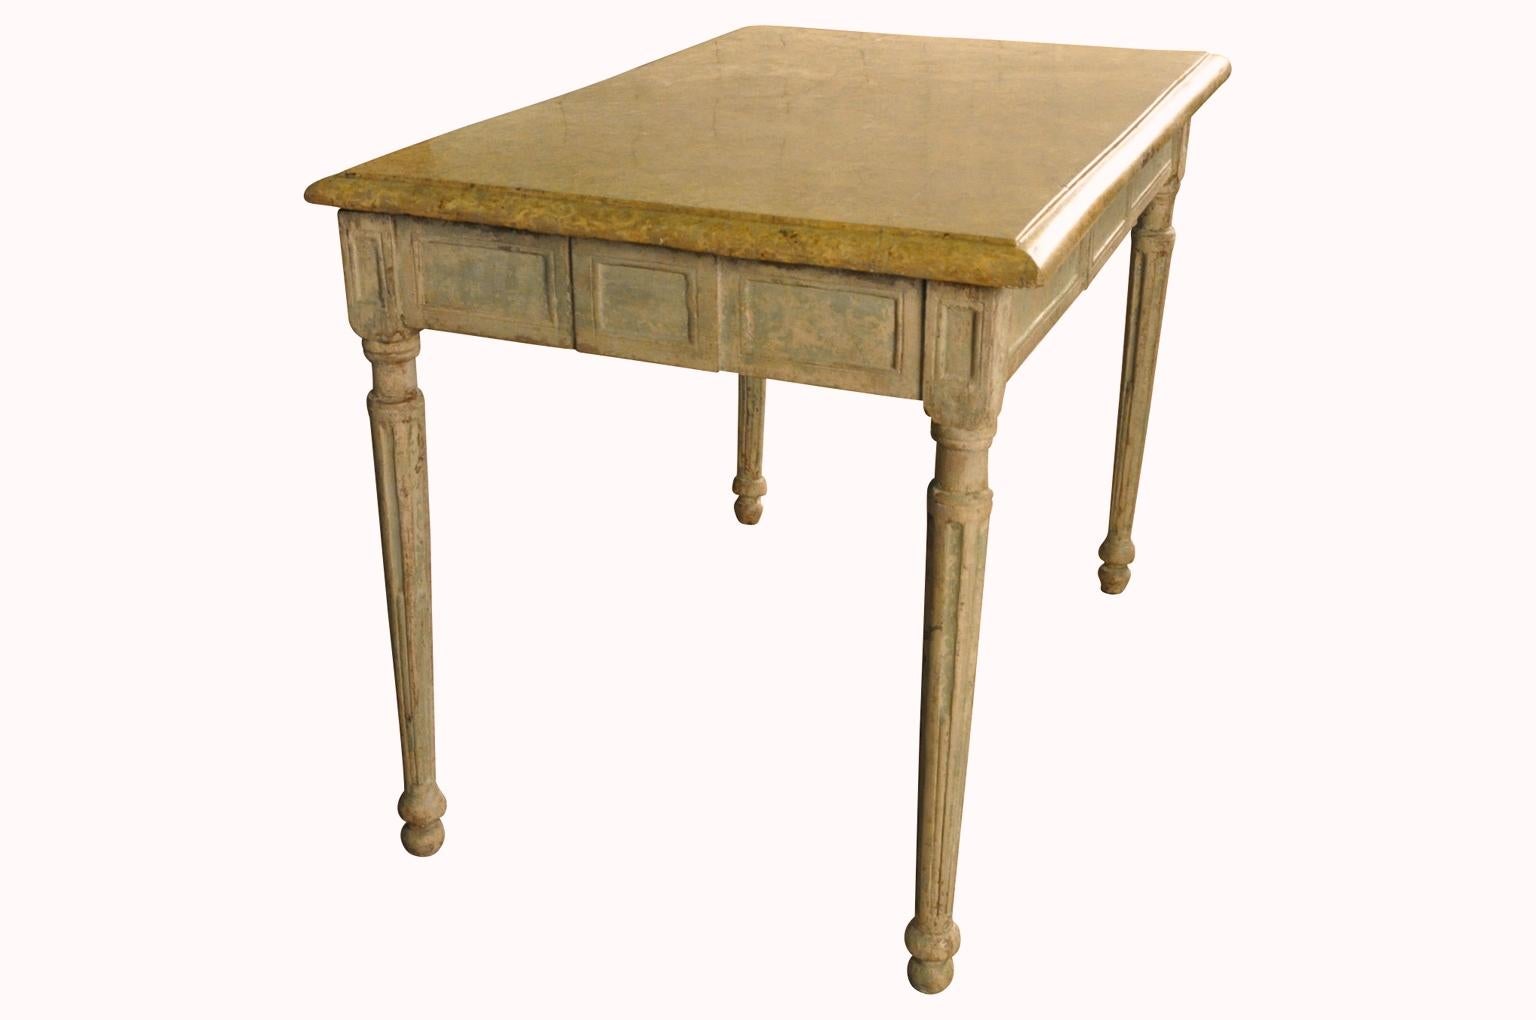 An outstanding 18th century period Louis XVI side table - writing table in painted wood with marble top. Beautifully constructed with fluted legs and molded apron panels. Tremendous patina. Perfect as a bedside table, side table or vanity.